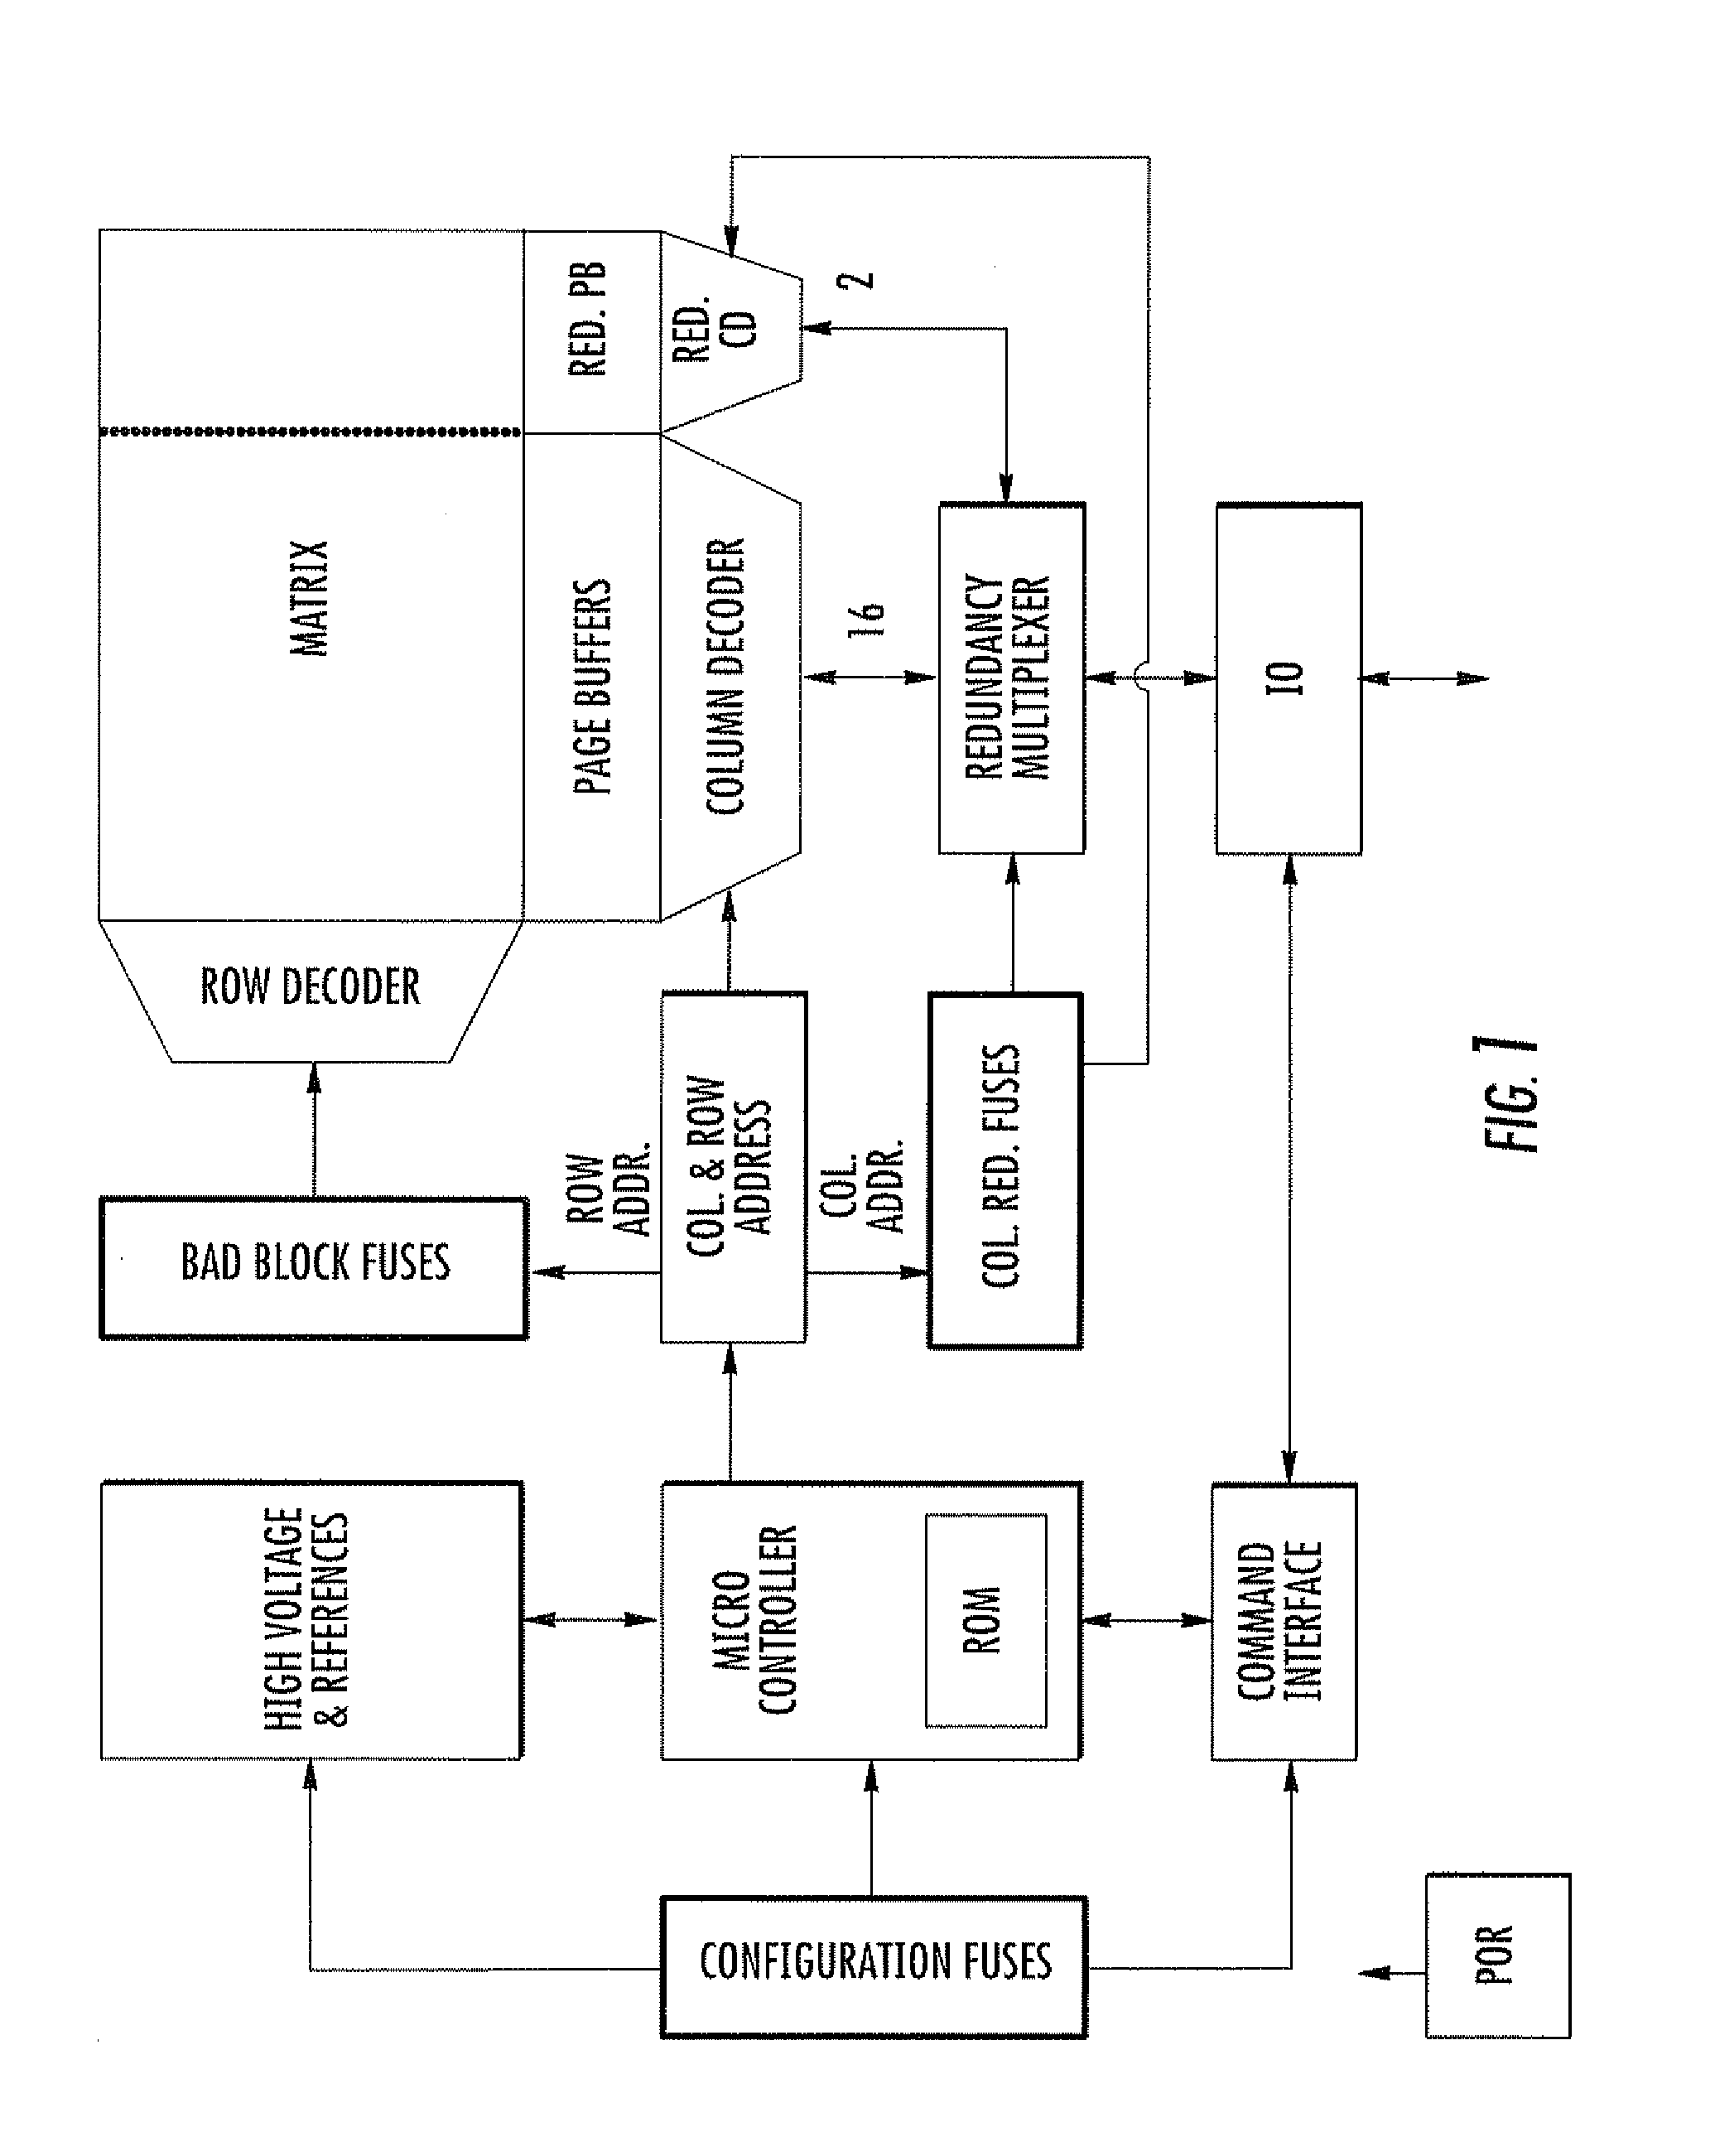 NAND flash memory device with ecc protected reserved area for non-volatile storage of redundancy data